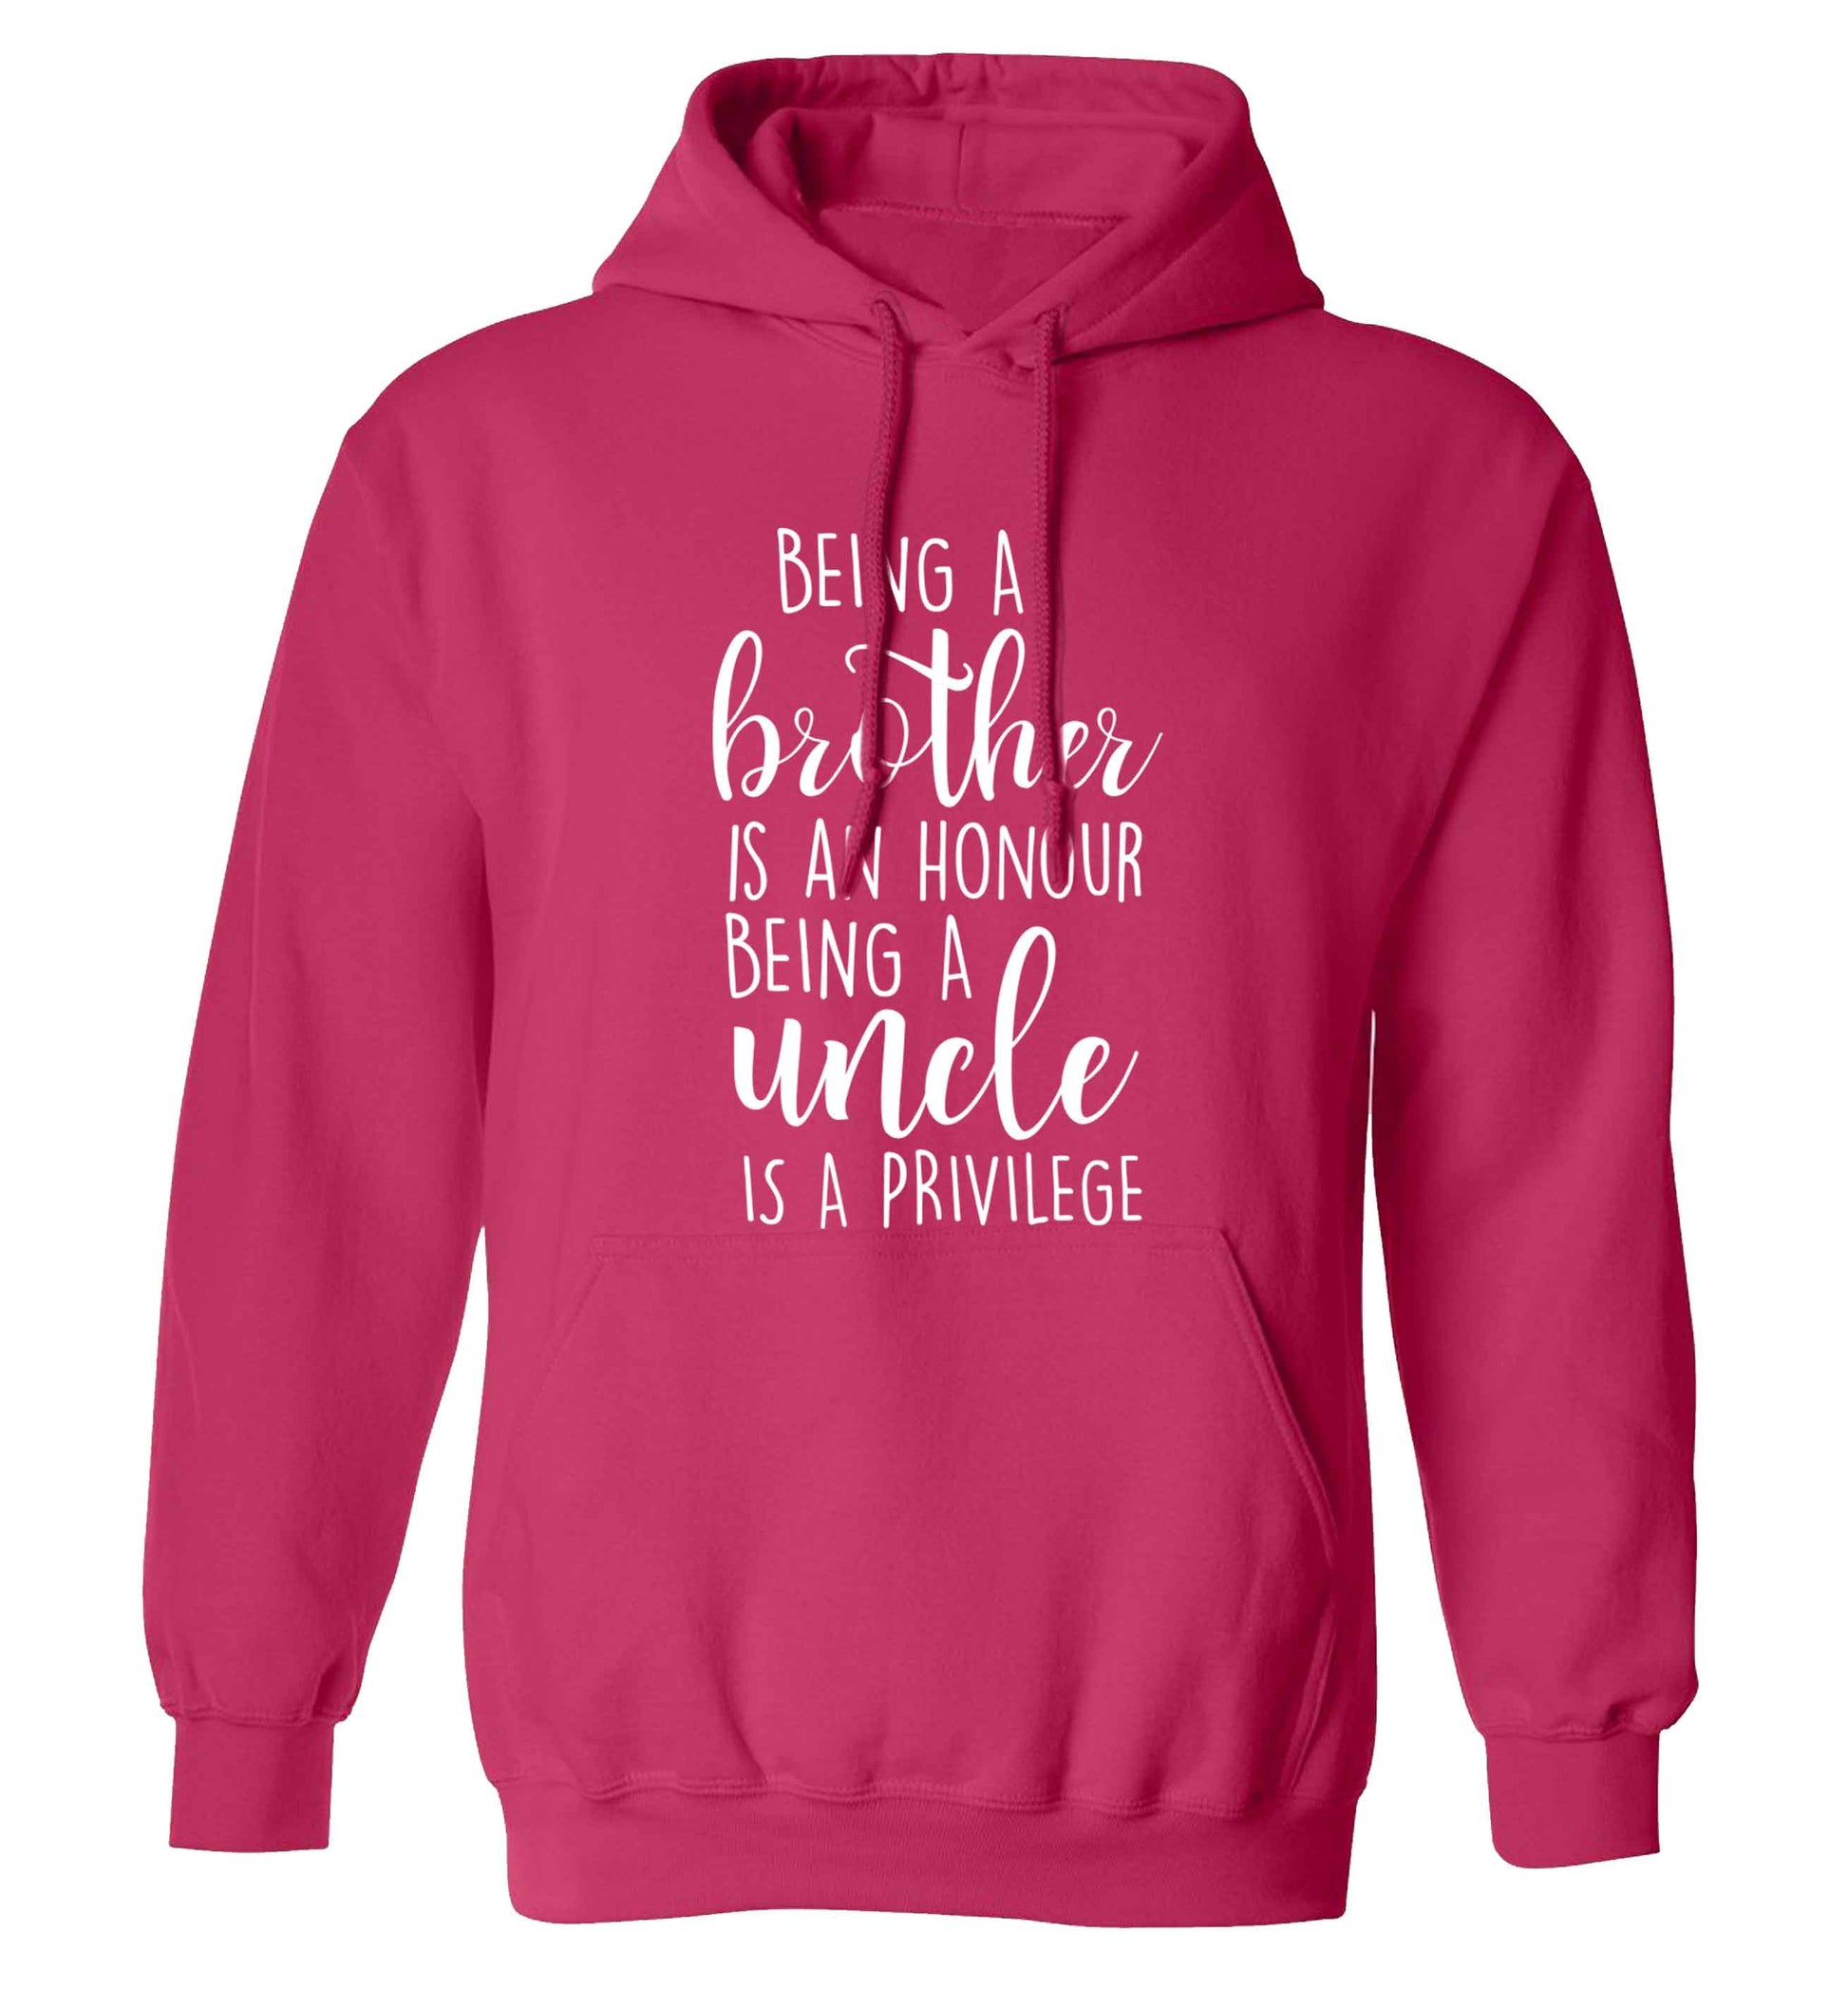 Being a brother is an honour being an uncle is a privilege adults unisex pink hoodie 2XL